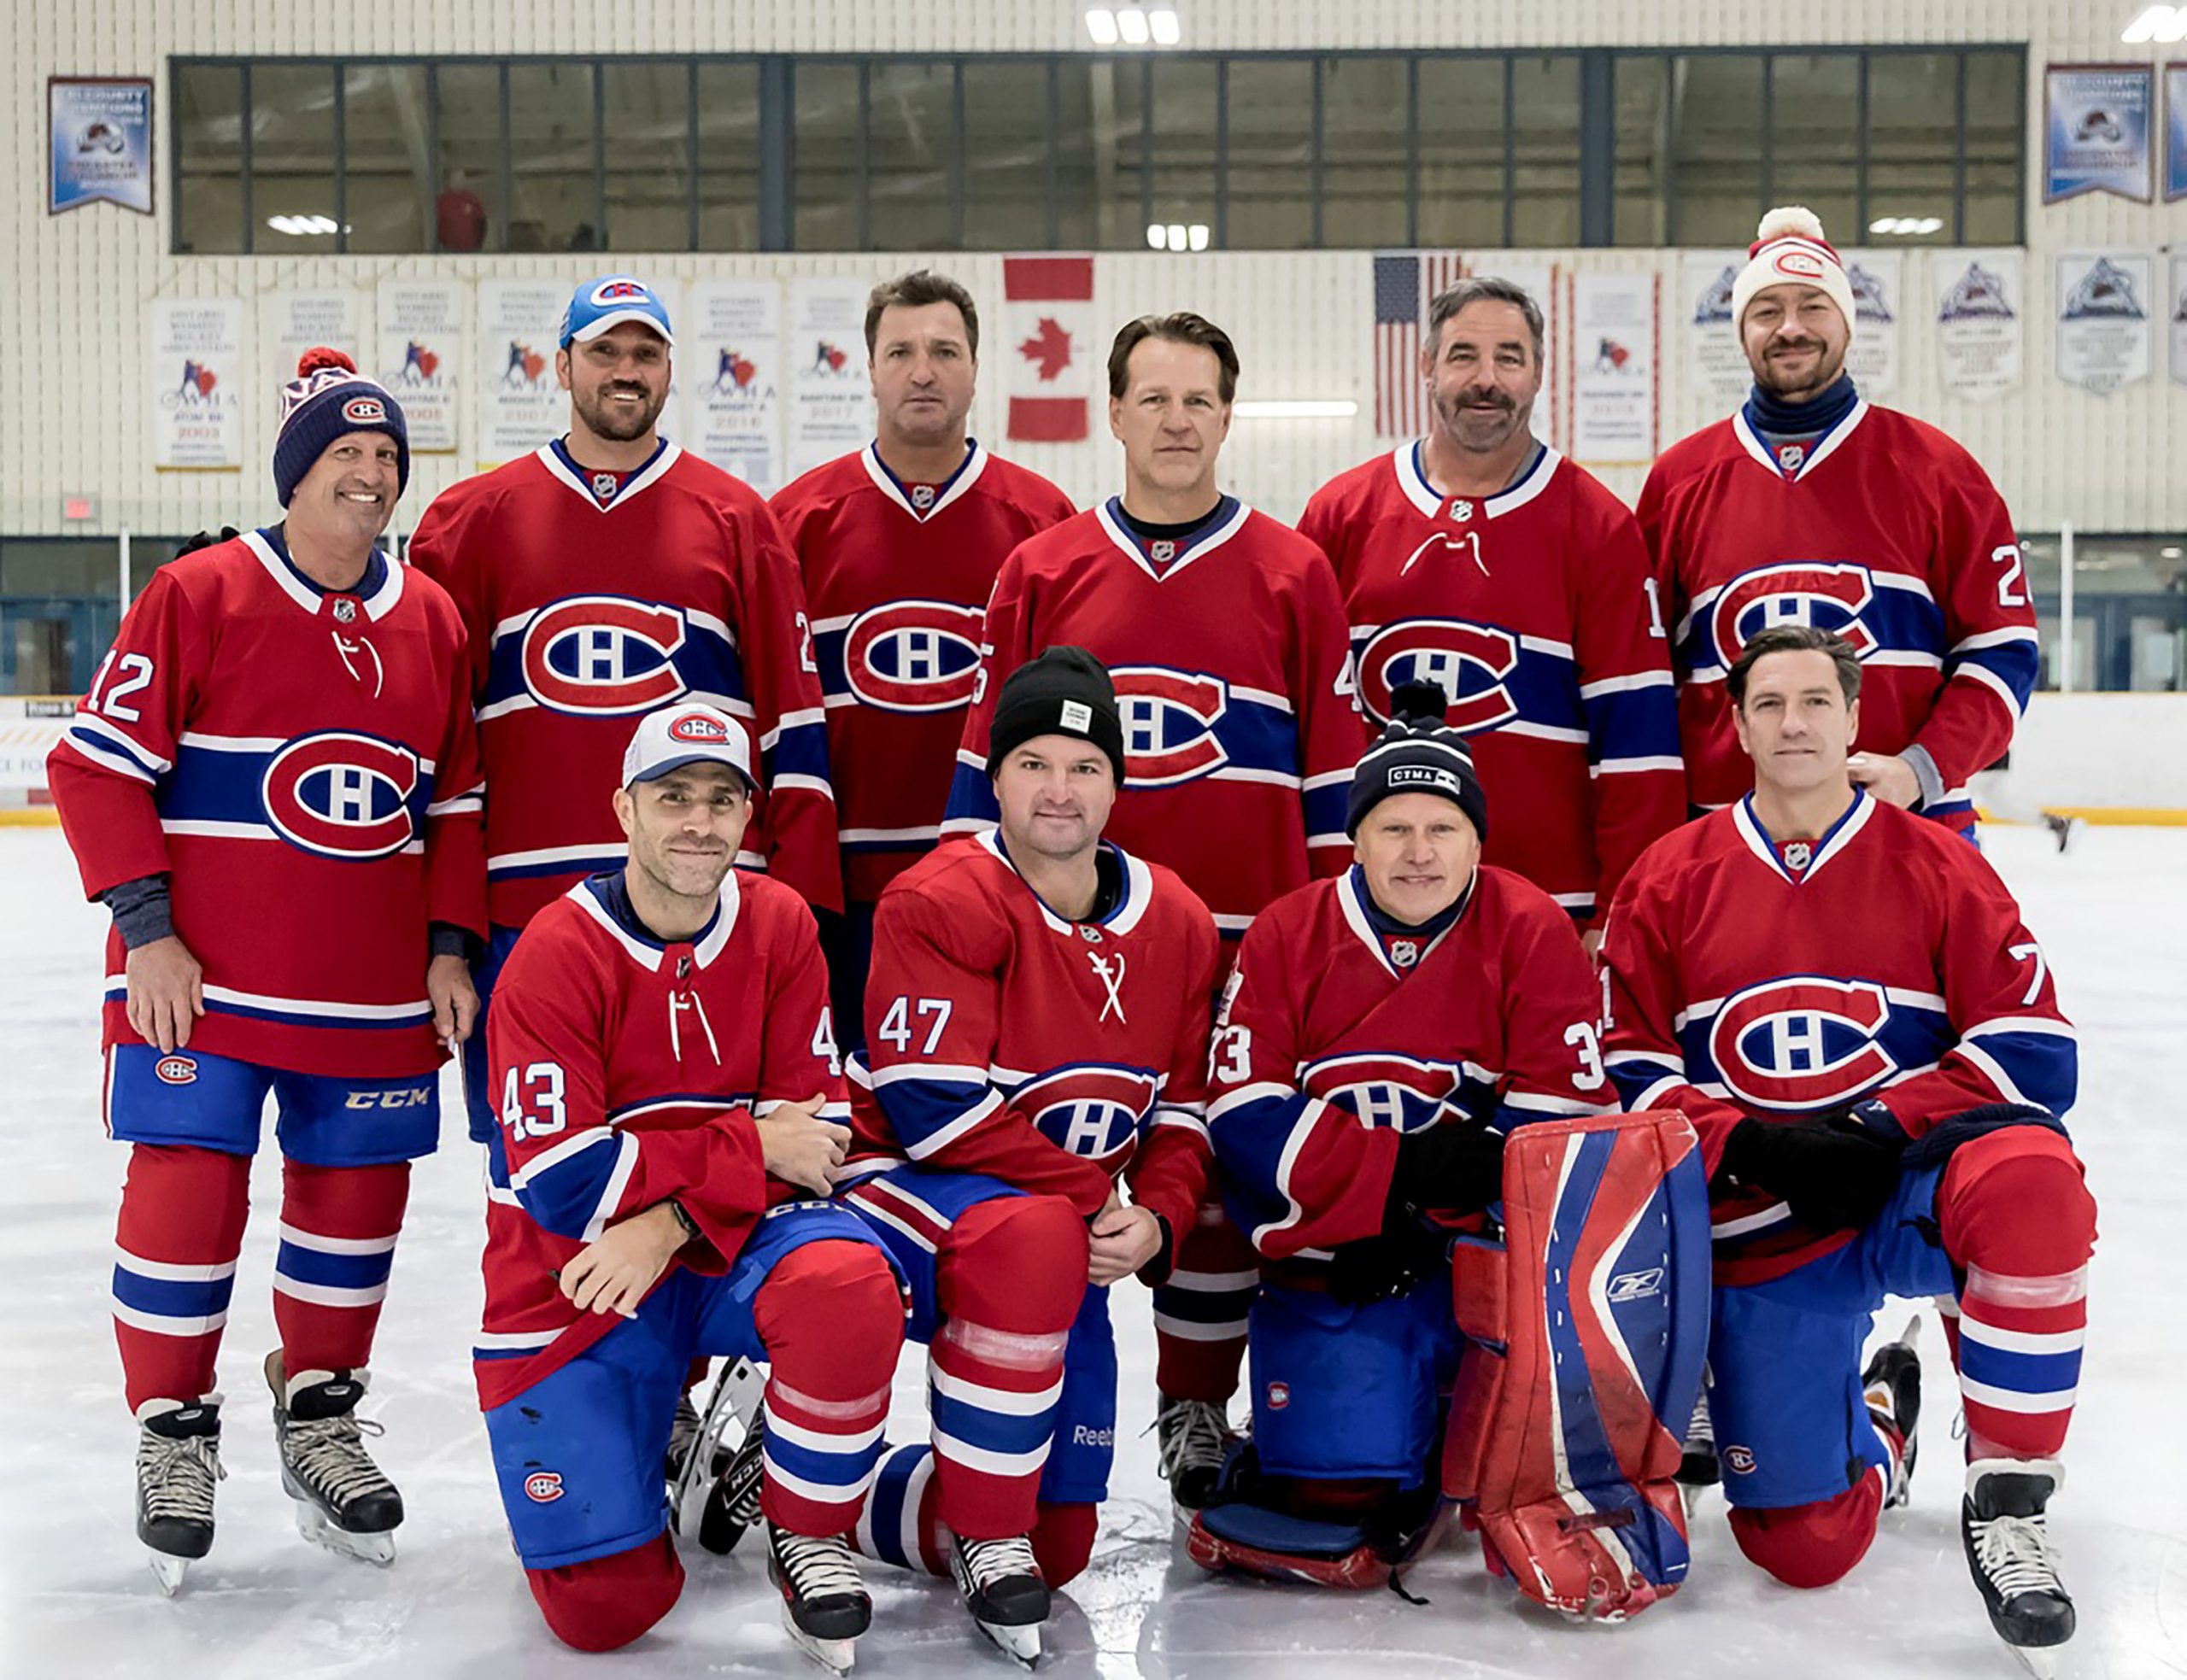 Montreal Canadiens Alumni coming to Palmerston